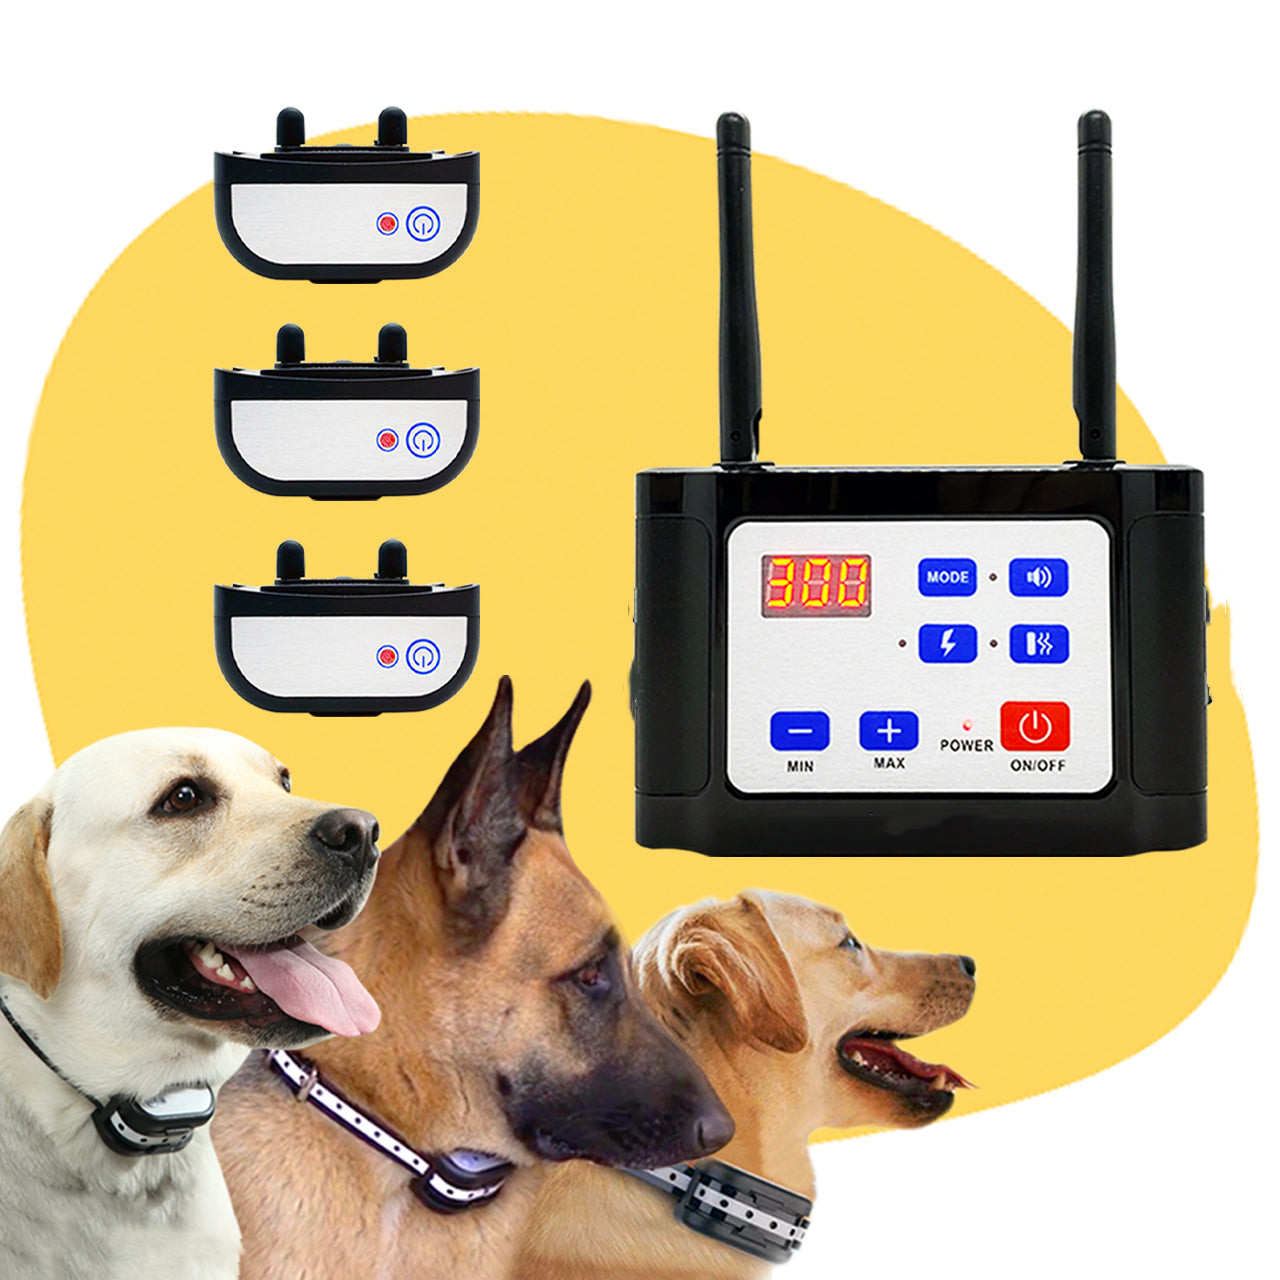 2-in-1 Wireless Dog Fence & Outdoor Training Collar, Dog Containment System